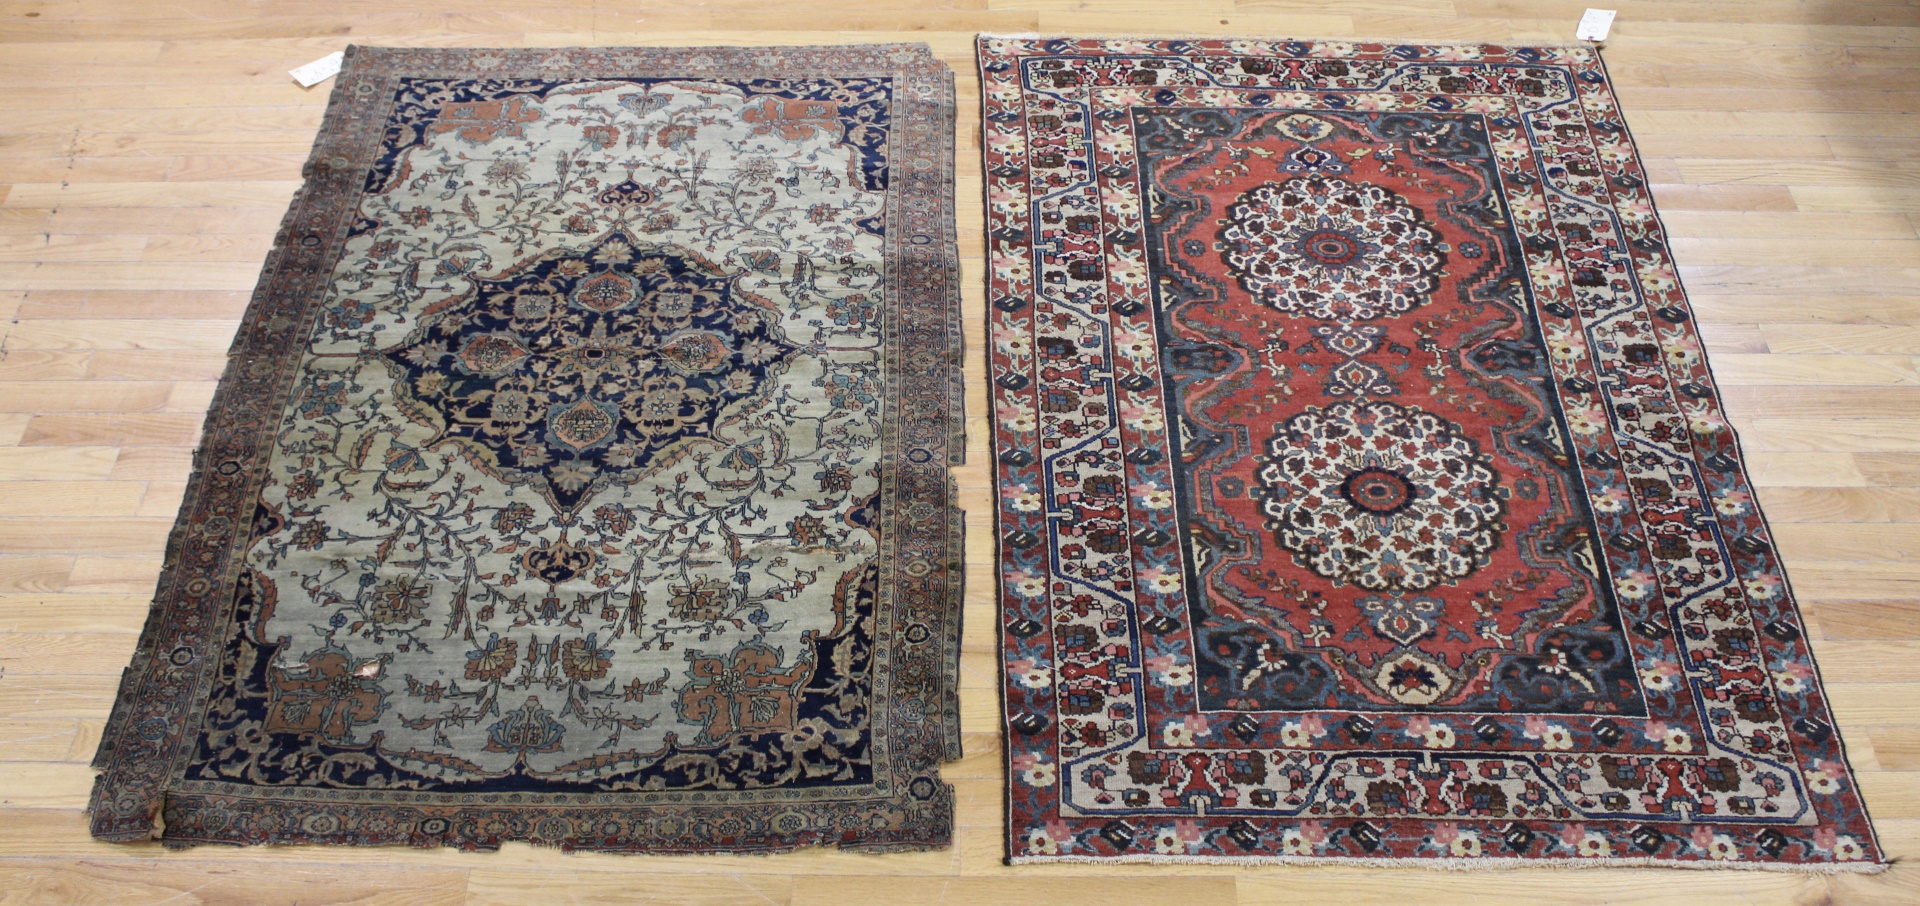 2 ANTIQUE FINELY HAND WOVEN AREA 3b908f